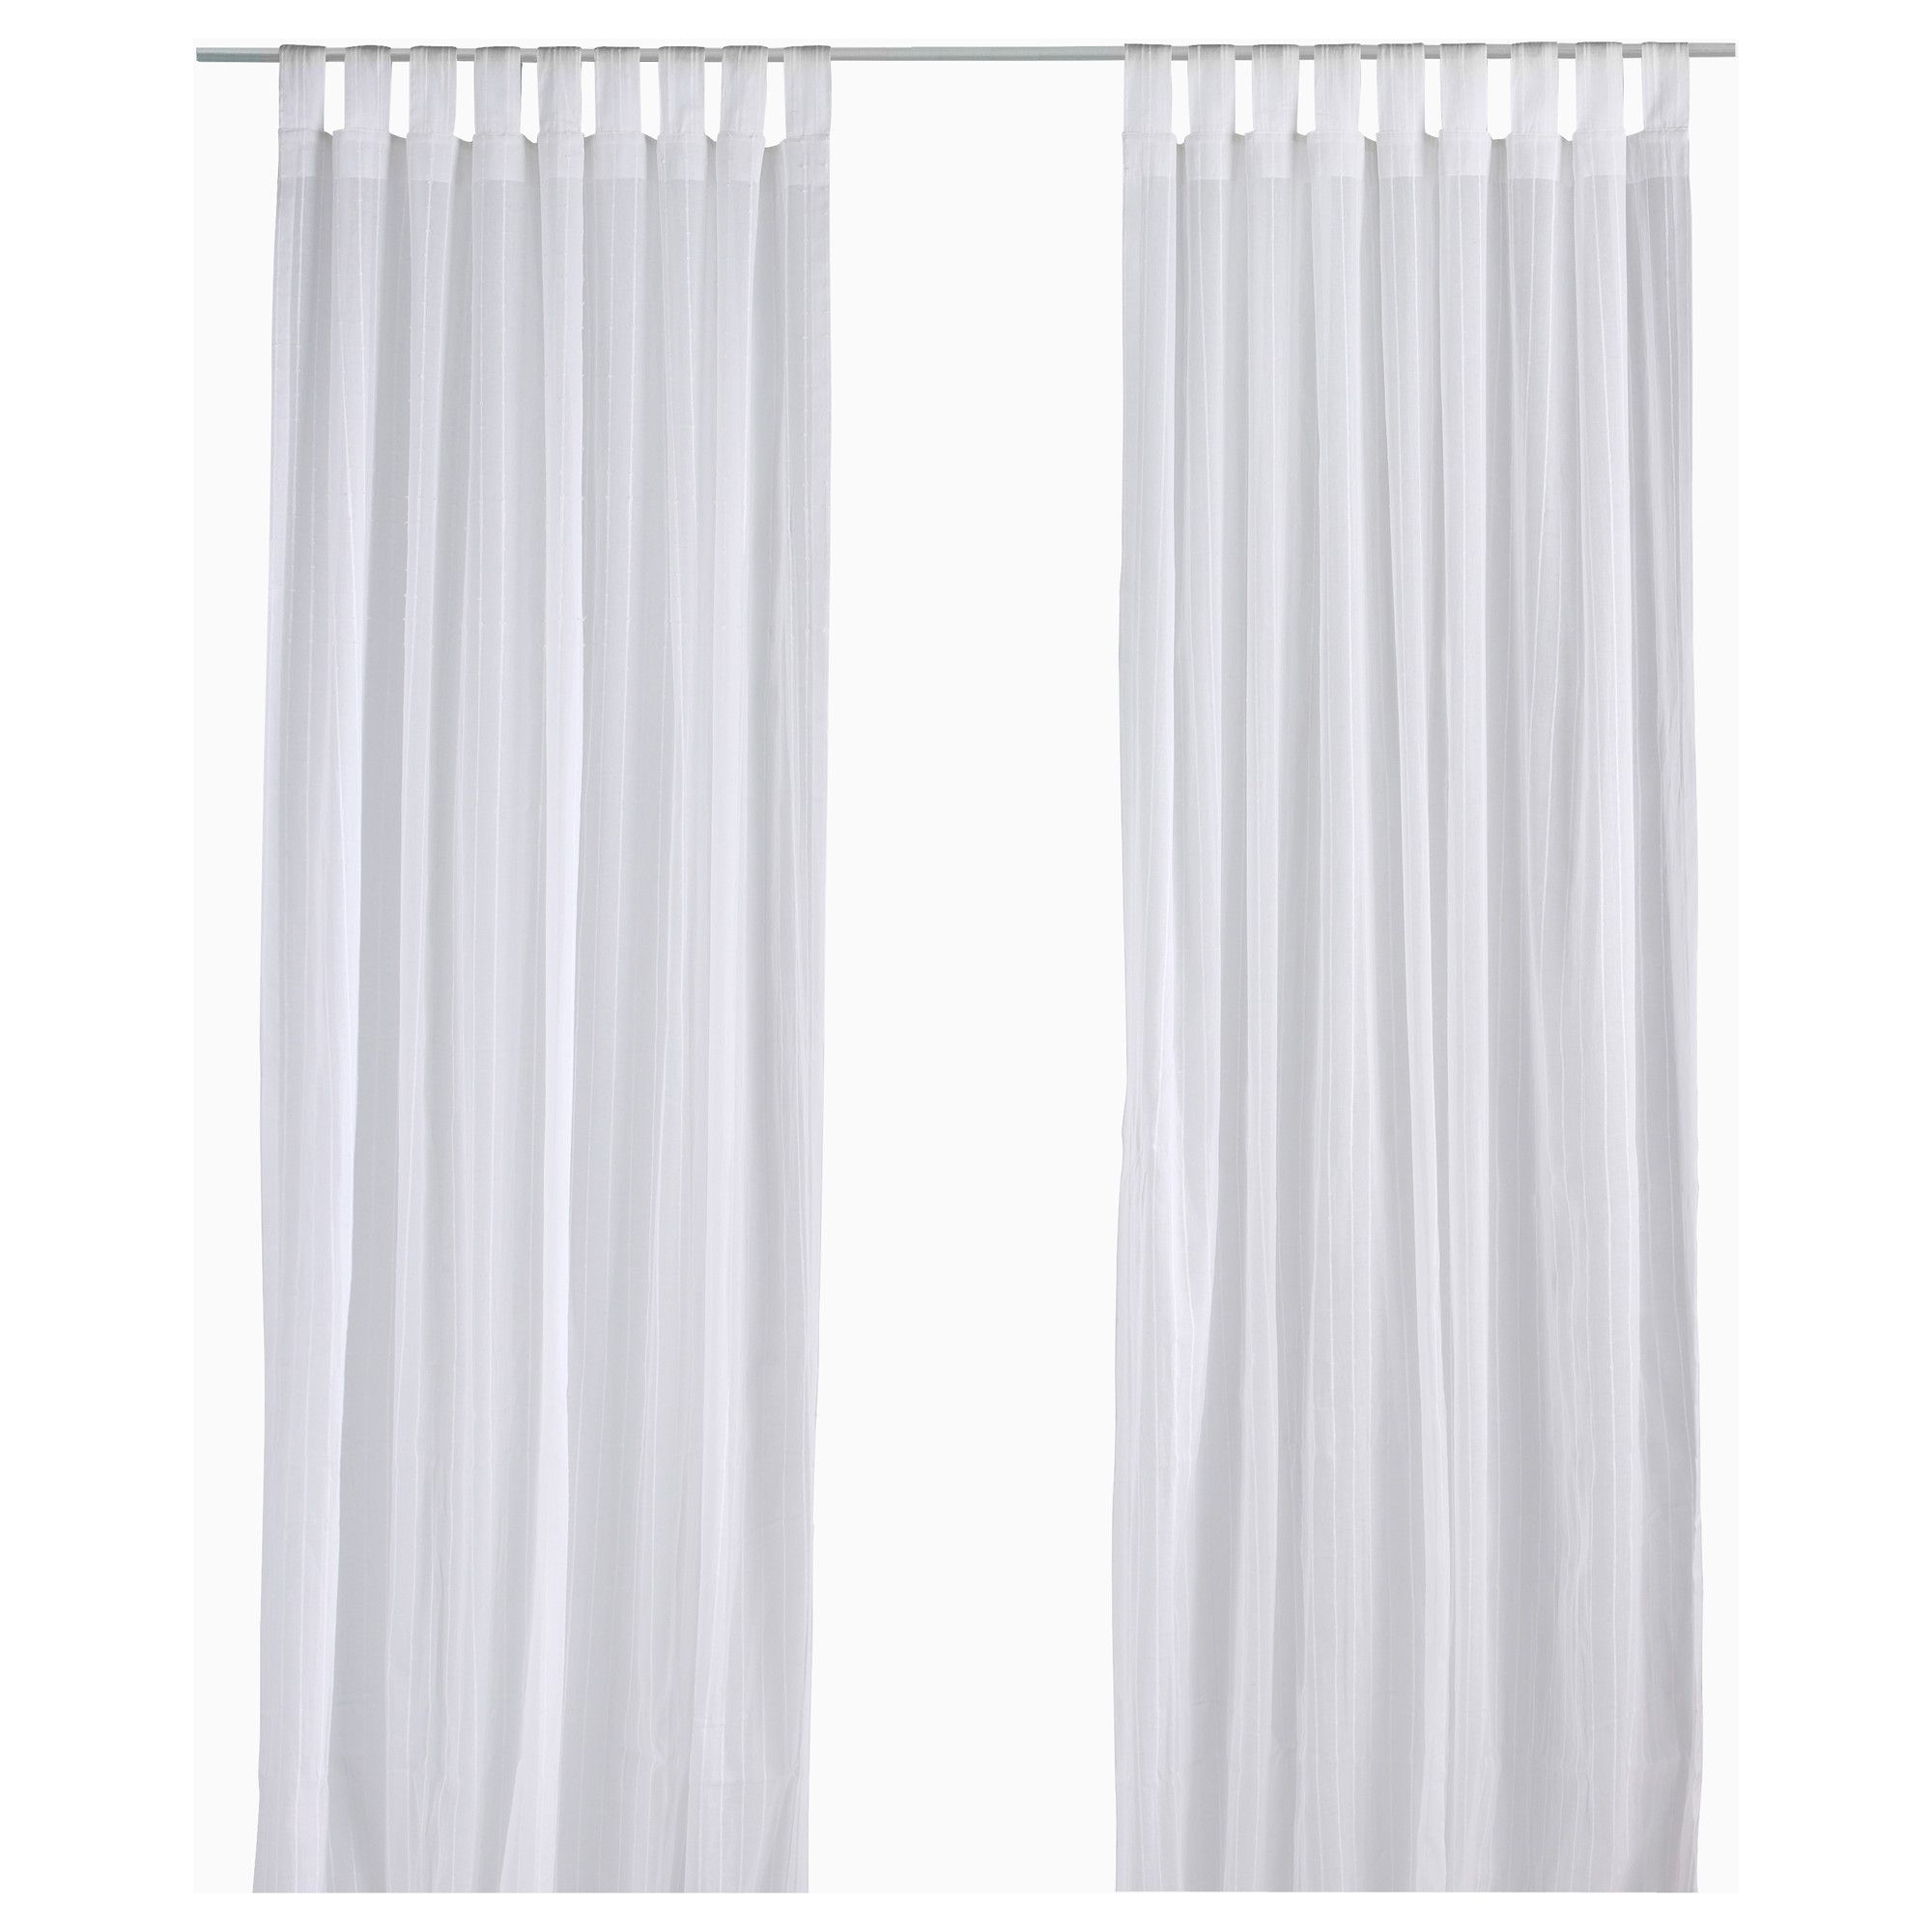 Interior 54 Inch Length Curtains And 63 Inch Curtains With Intended For 92 Inches Long Curtains (View 25 of 25)